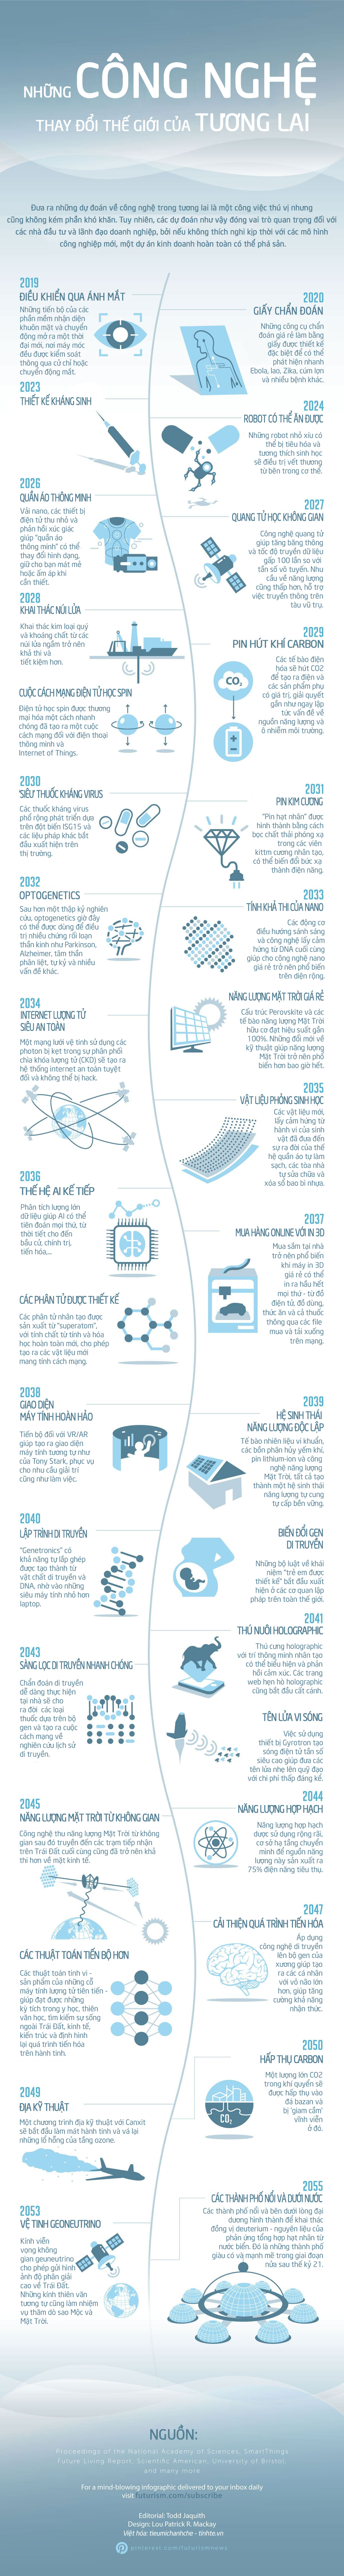 infographic-timeline-of-future-technology-tinhte.jpg